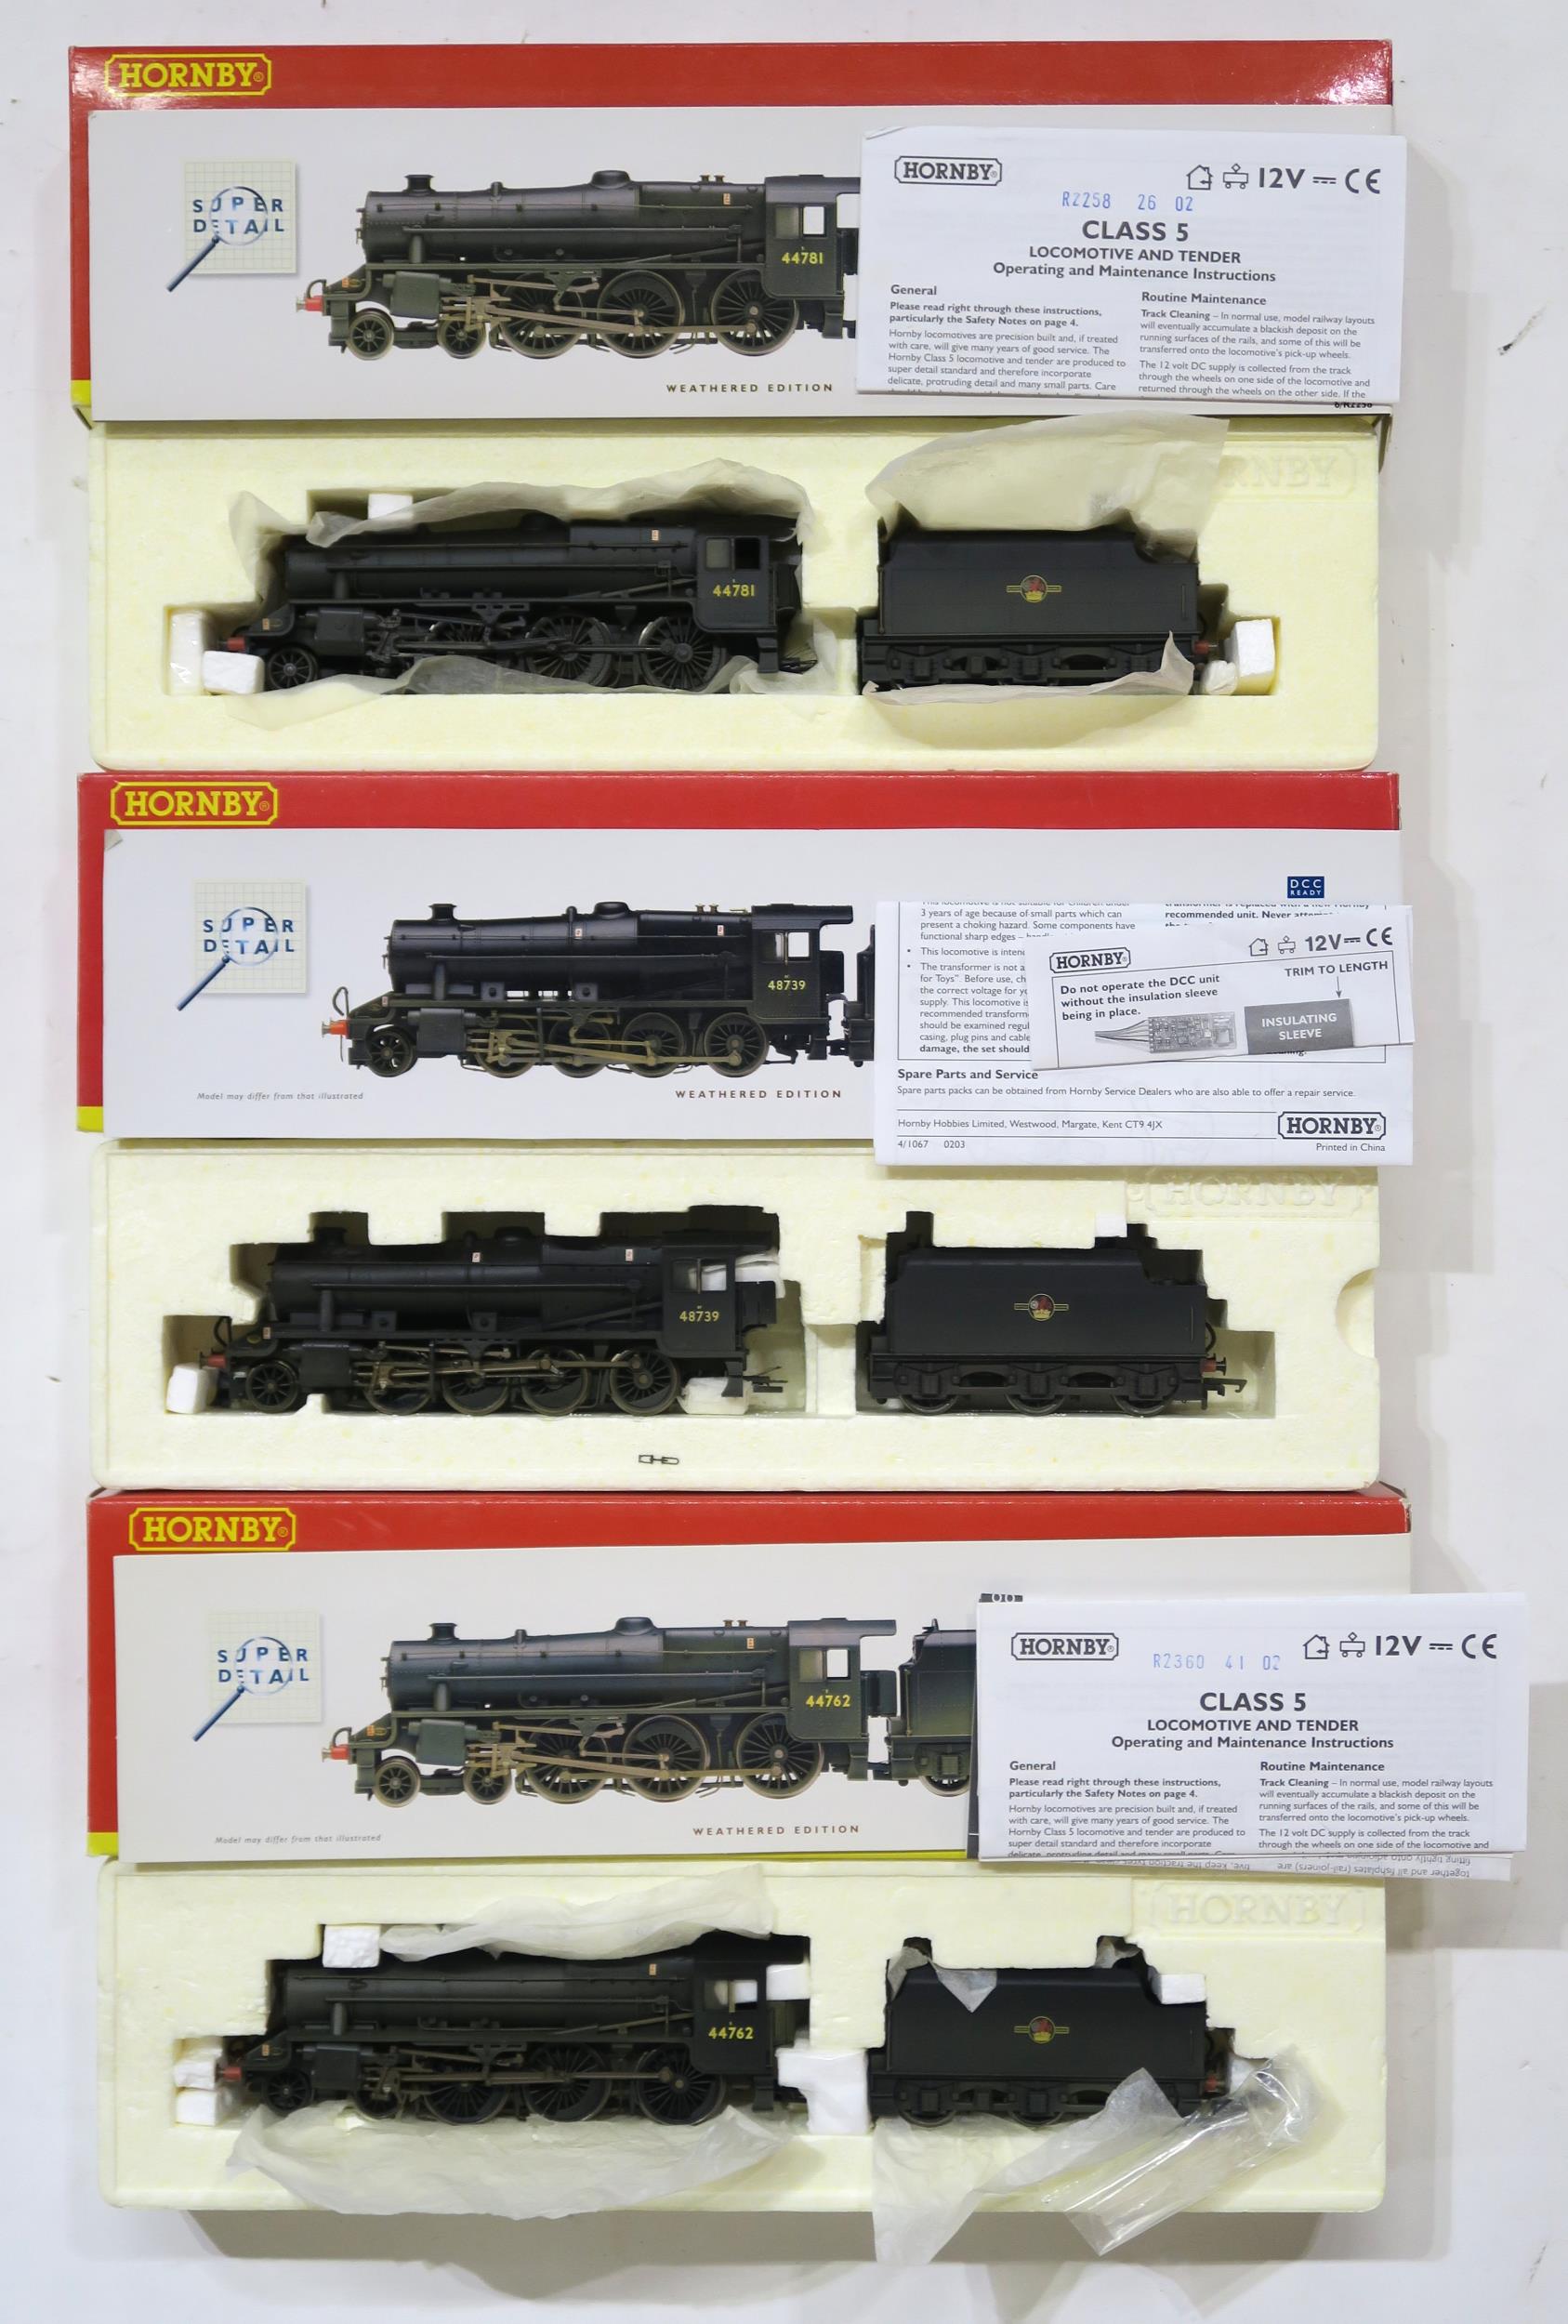 Three Hornby 00-gauge locomotives with tender, boxed - R2360 BR 4-6-0 Class SMT Locomotive Weathered